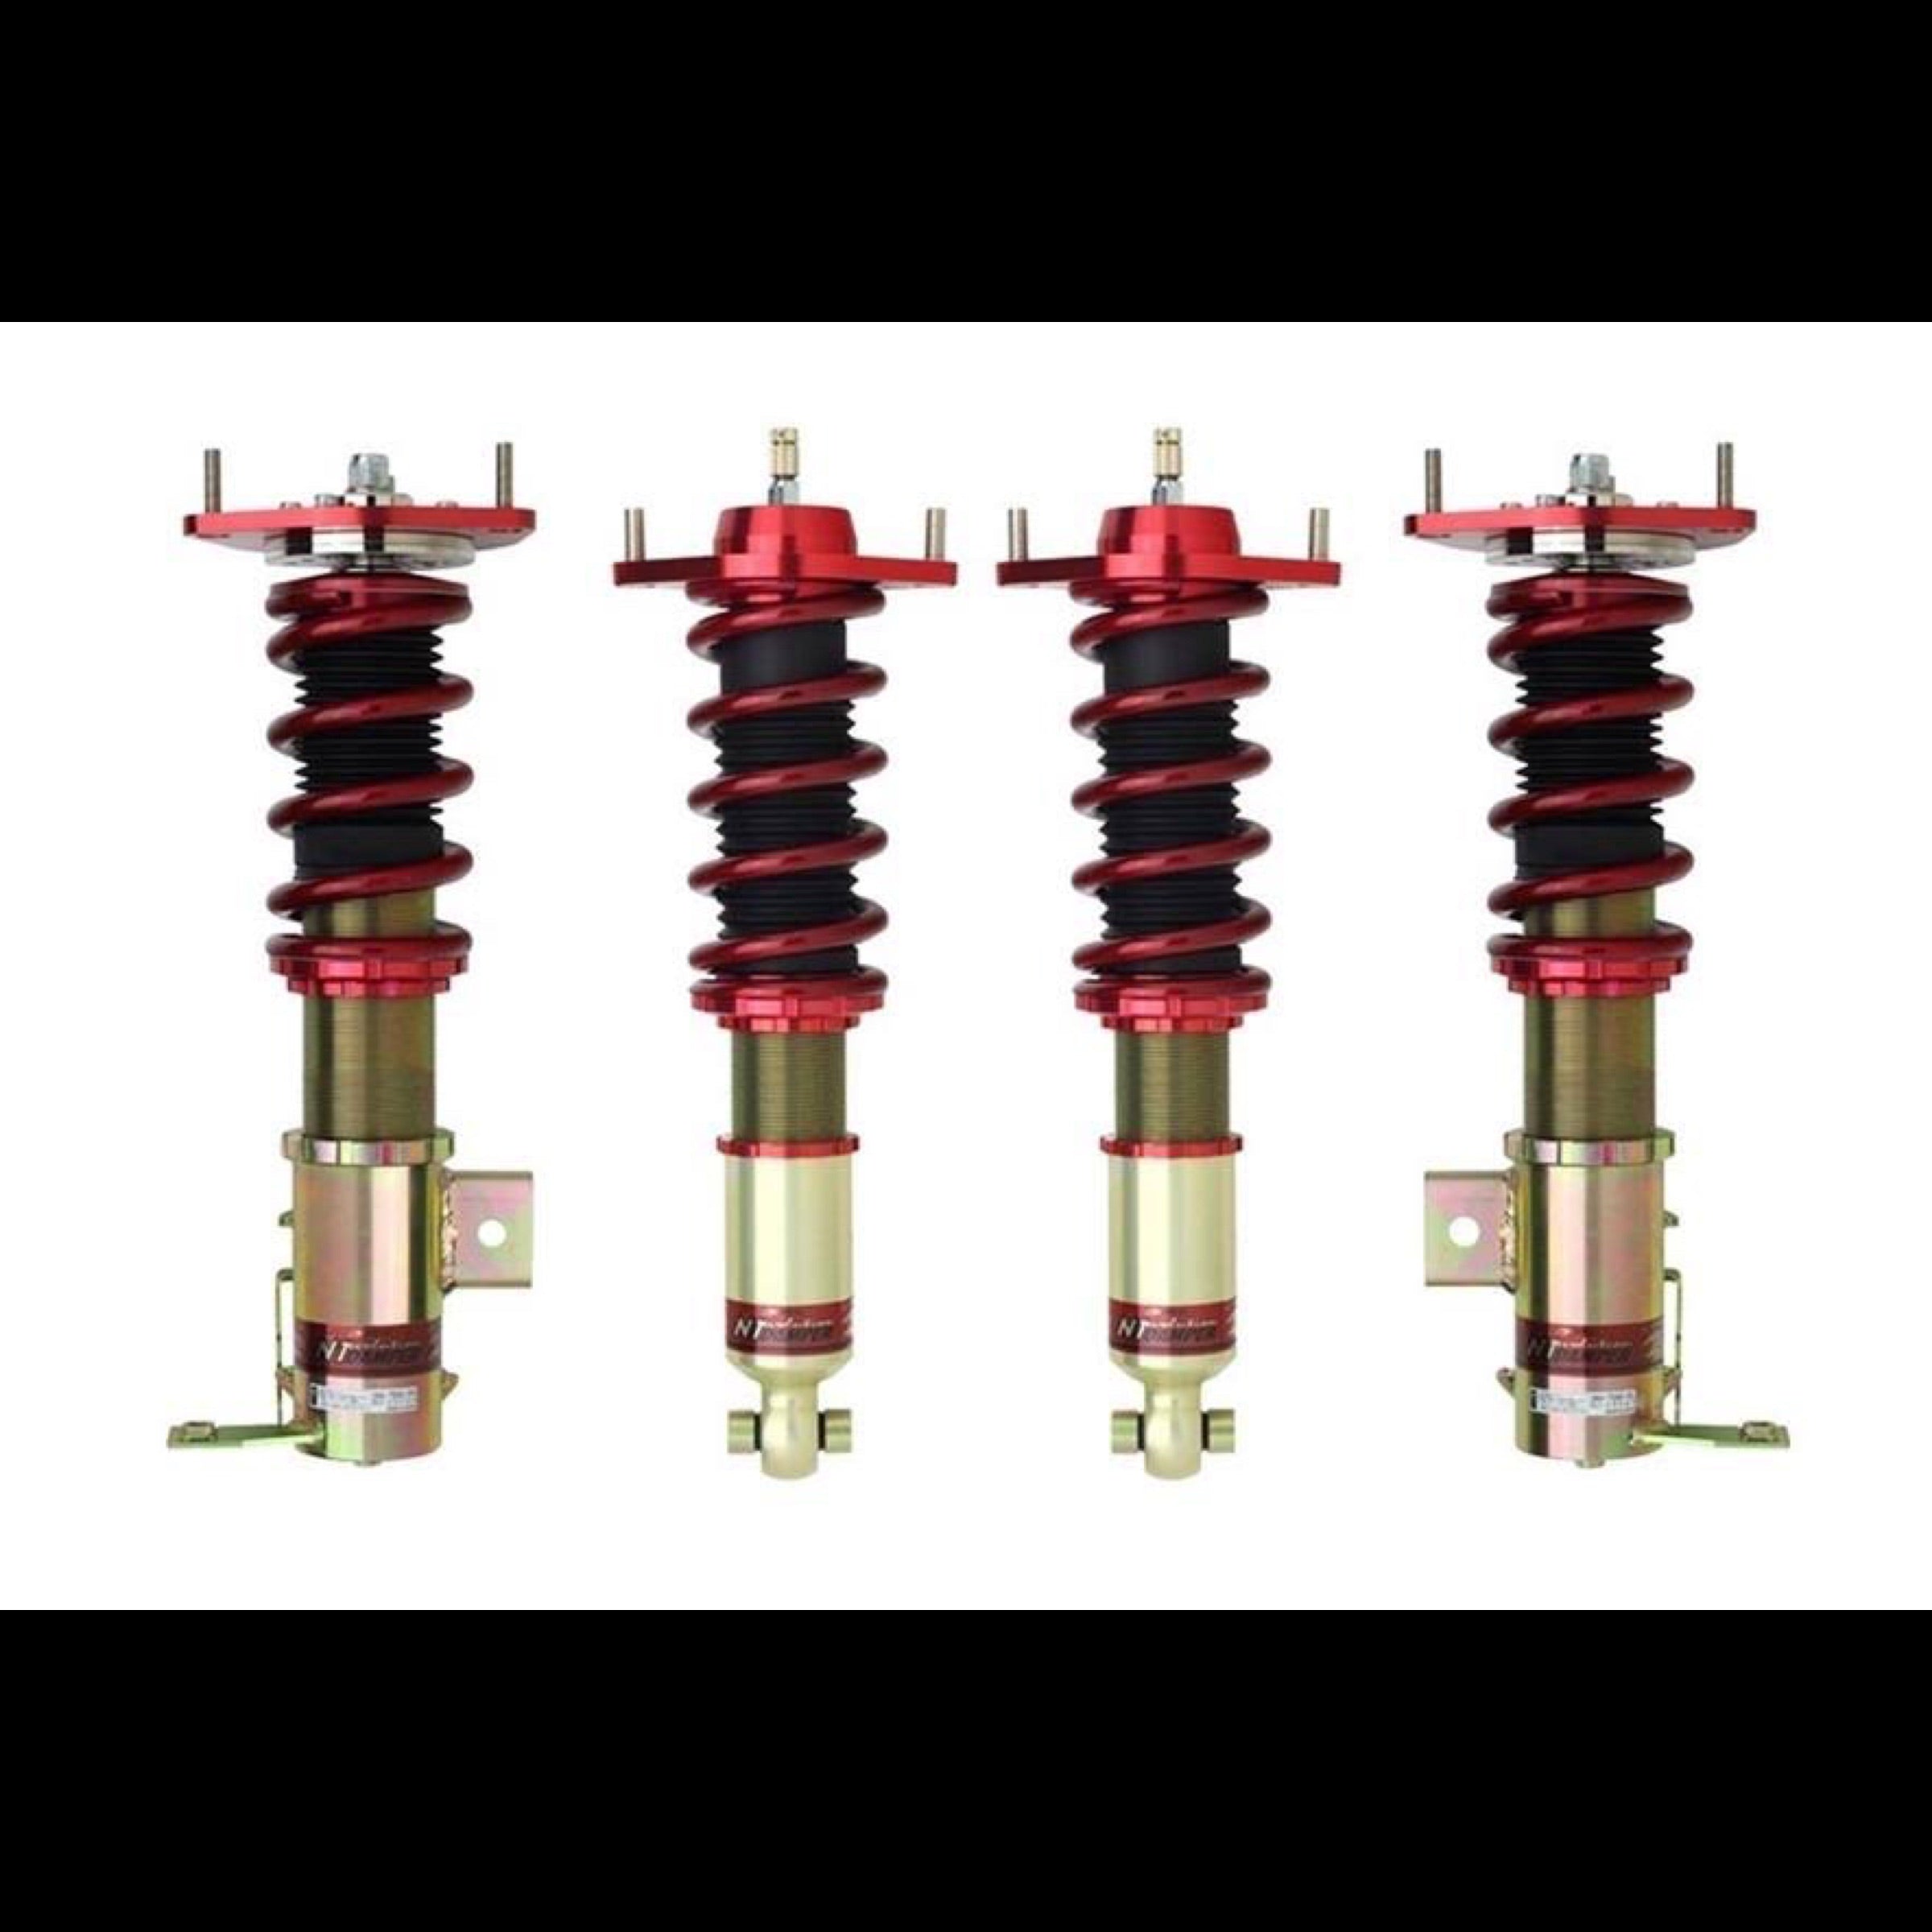 Apexi Coilovers for Nissan S13 in red and gold